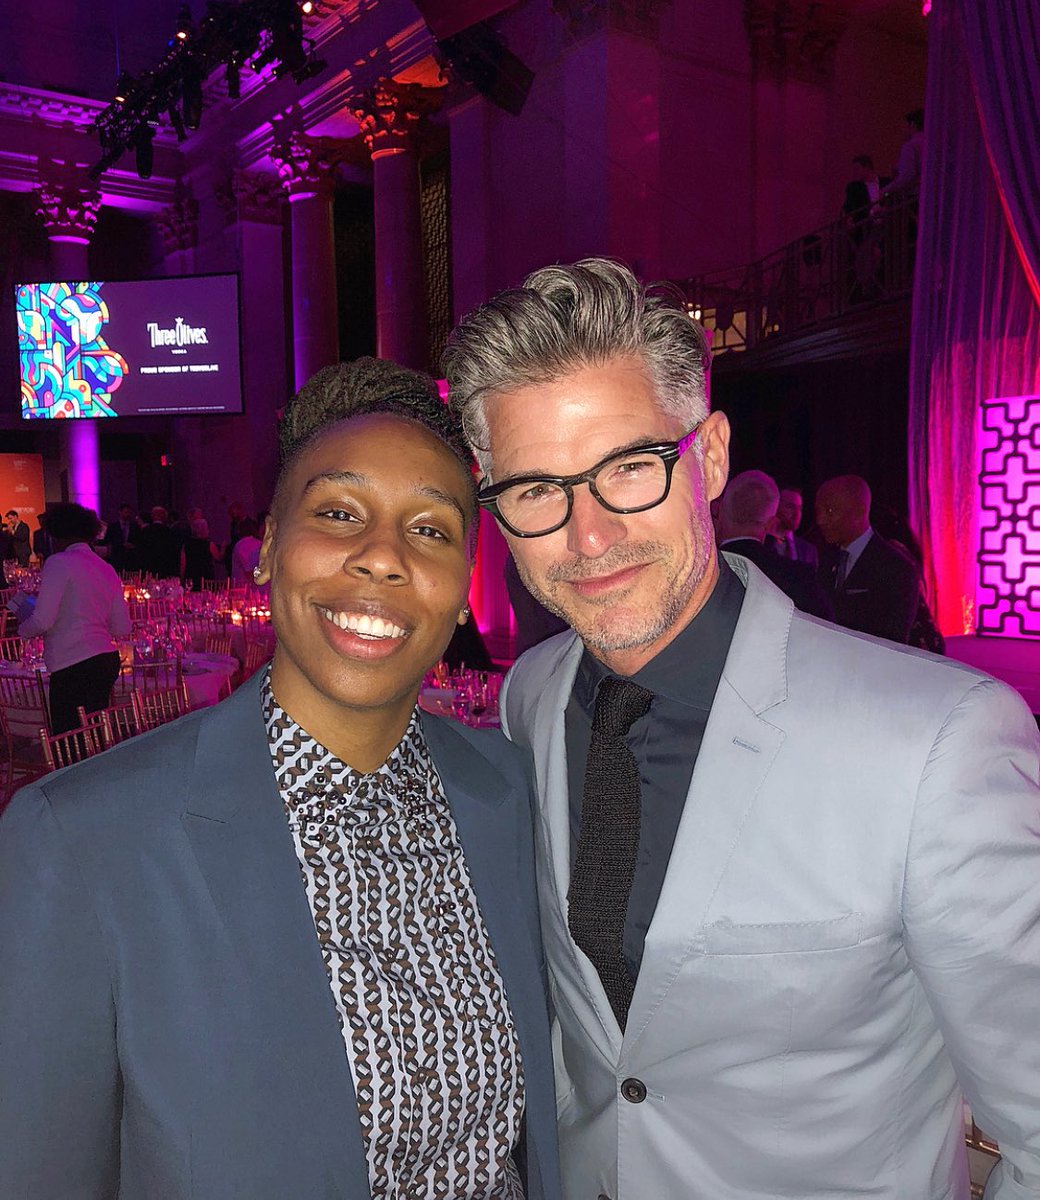 Huge pleasure 2 meet #LenaWaithe at #TrevorLive She n my friend @GBerlanti were deservedly honored as #heroes 2 the #LGBTQ community 4 unyielding commitment 2 telling the stories of ‘us’. Bravo 2 you, Greg, #DominicBarton and the entire @trevorproject team. #strongertogether 🌈🖤